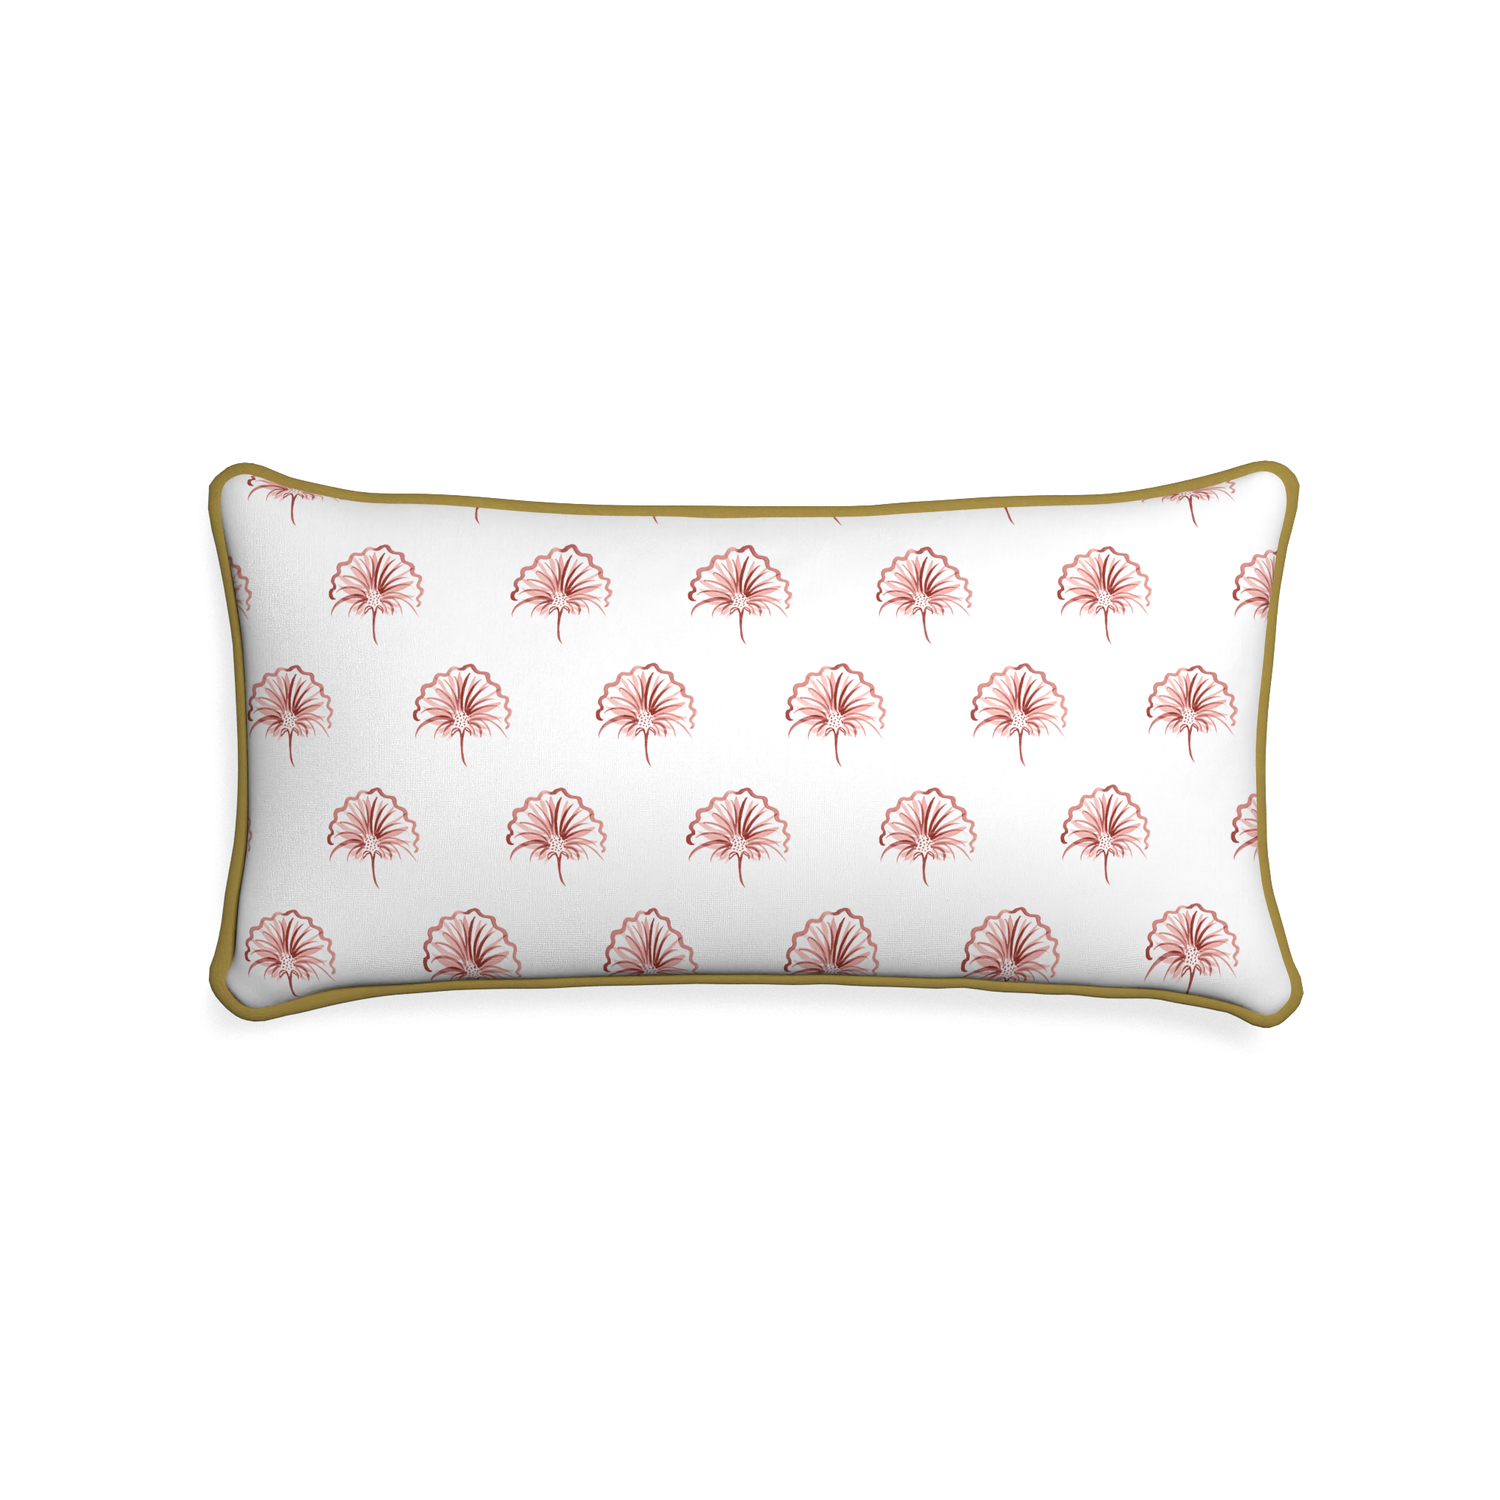 Midi-lumbar penelope rose custom floral pinkpillow with c piping on white background